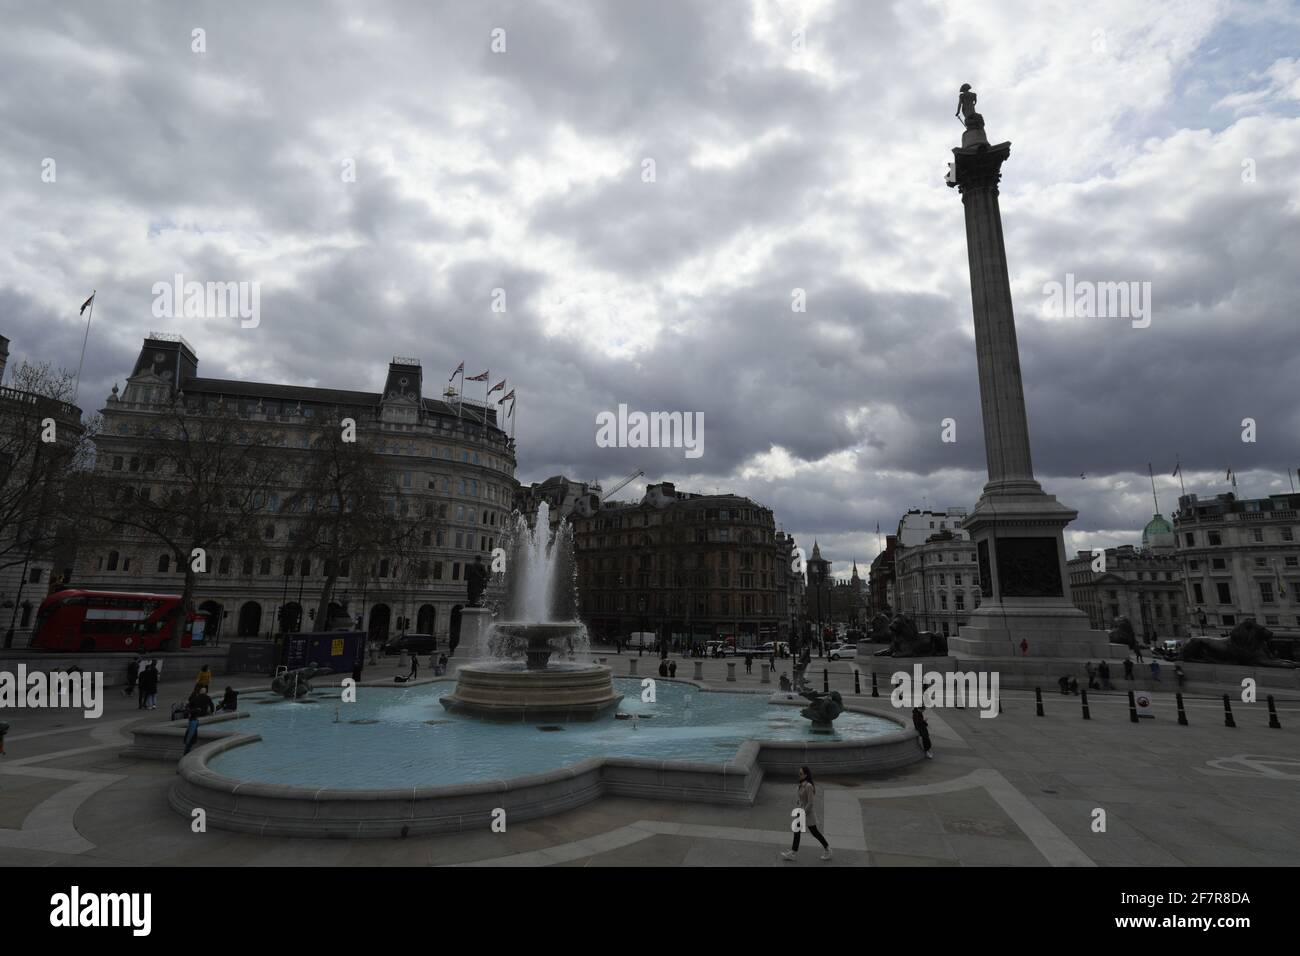 London, Britain. 9th Apr, 2021. People walk through Trafalgar Square in London, Britain, on April 9, 2021. COVID-19 deaths in Europe surpassed the one million mark on Friday, reaching 1,001,313, according to the dashboard of the World Health Organization's Regional Office for Europe. Credit: Tim Ireland/Xinhua/Alamy Live News Stock Photo